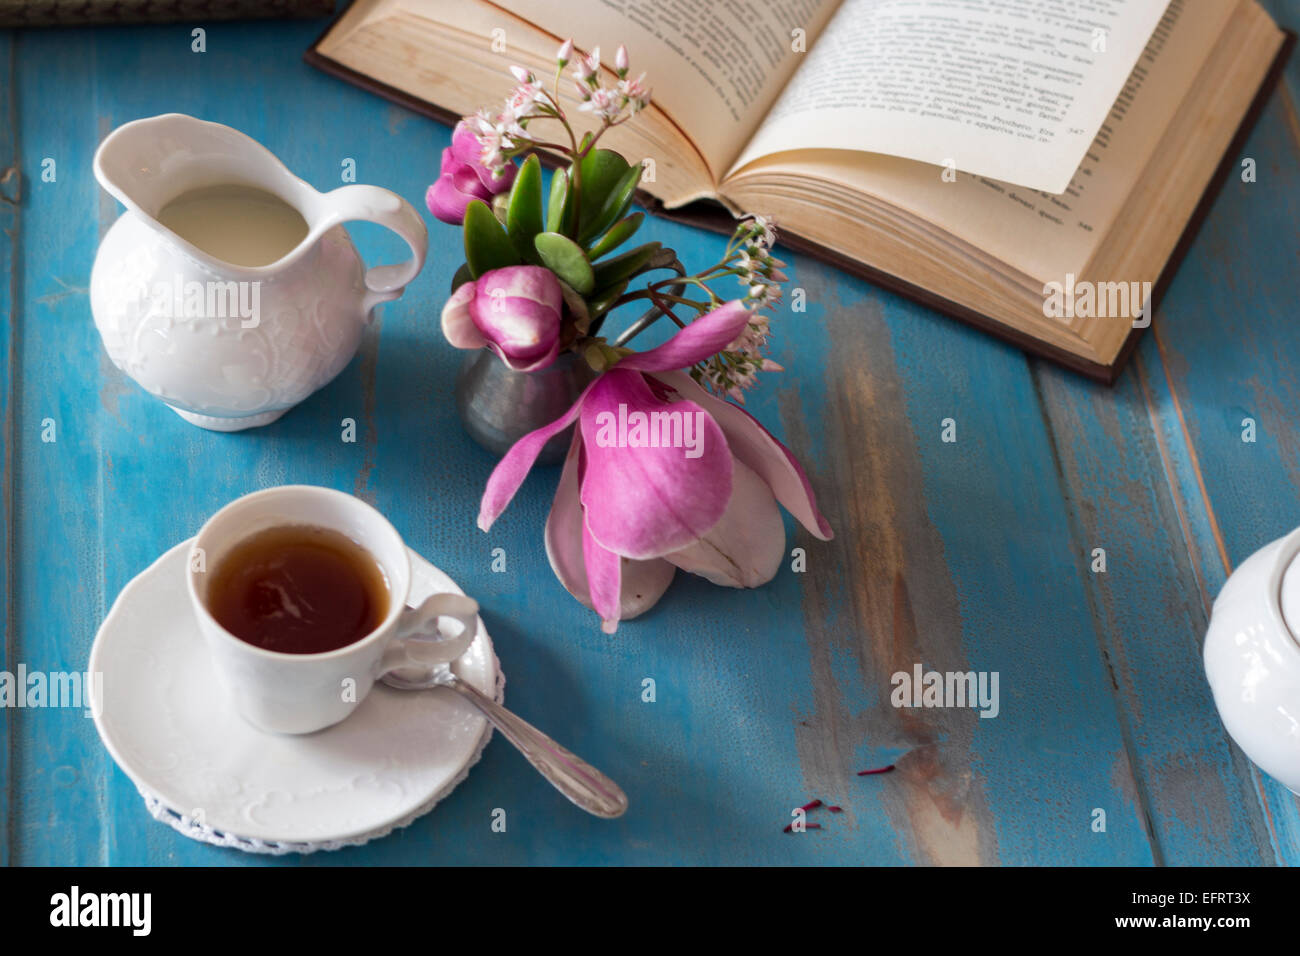 A tea cup and creamer on old wooden table. Top view. Stock Photo